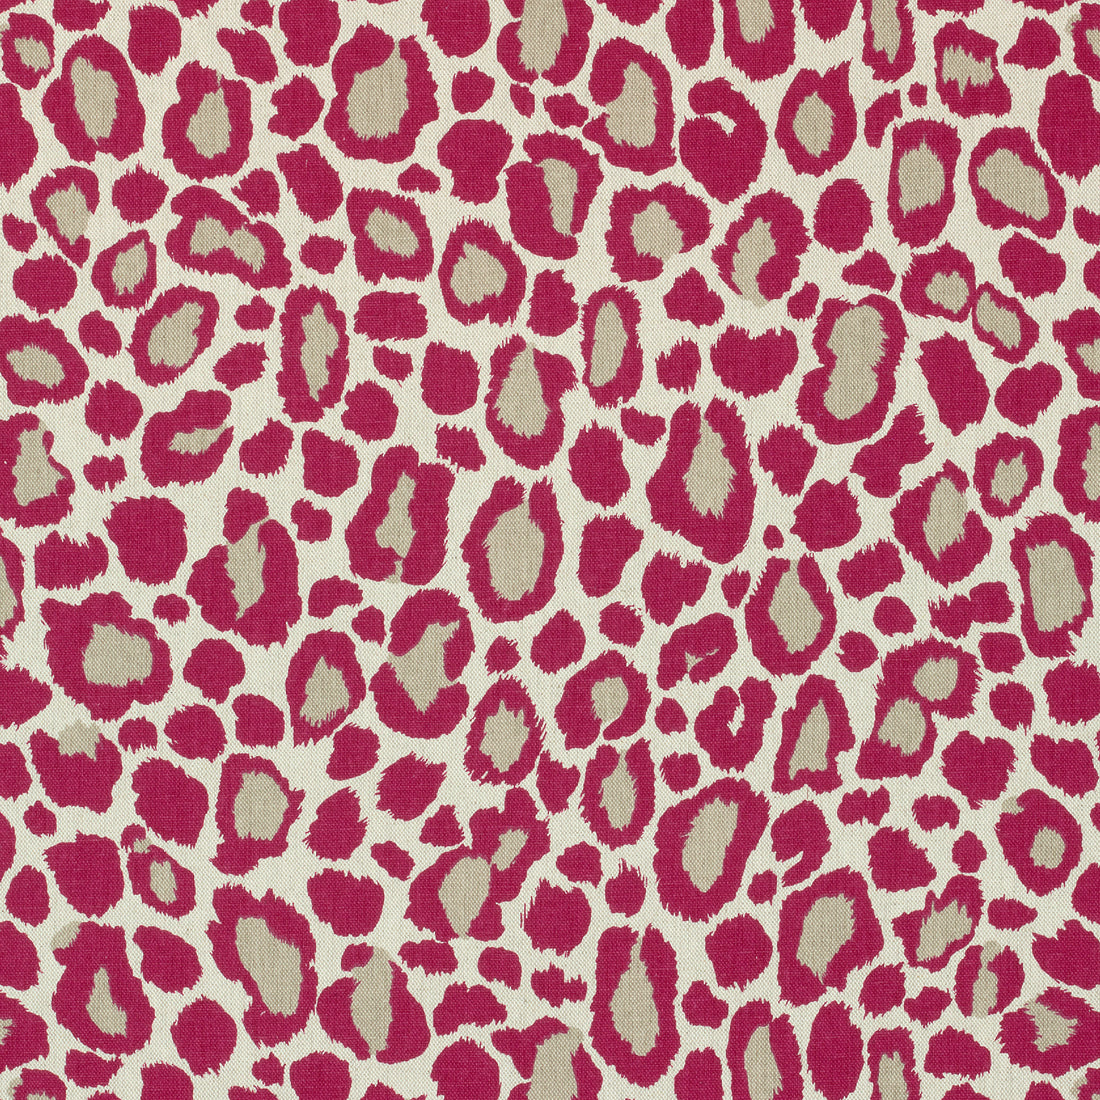 African Leopard fabric in fuchsia color - pattern number AF72980 - by Anna French in the Manor collection